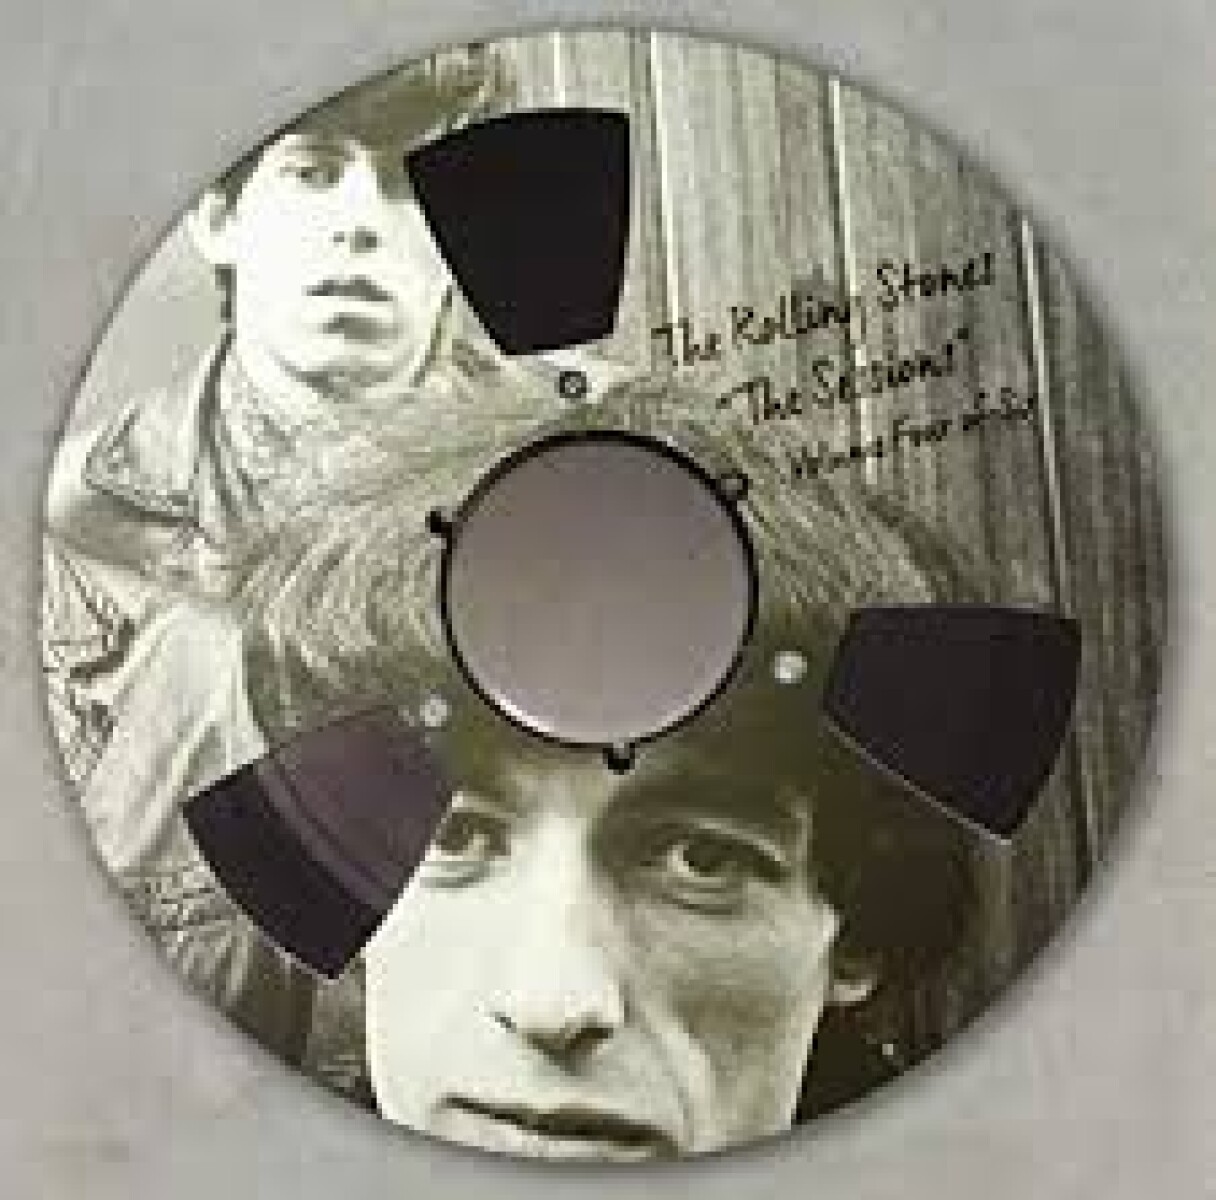 (c) The Rolling Stones- The Sessions Vol. 4- 10"" 